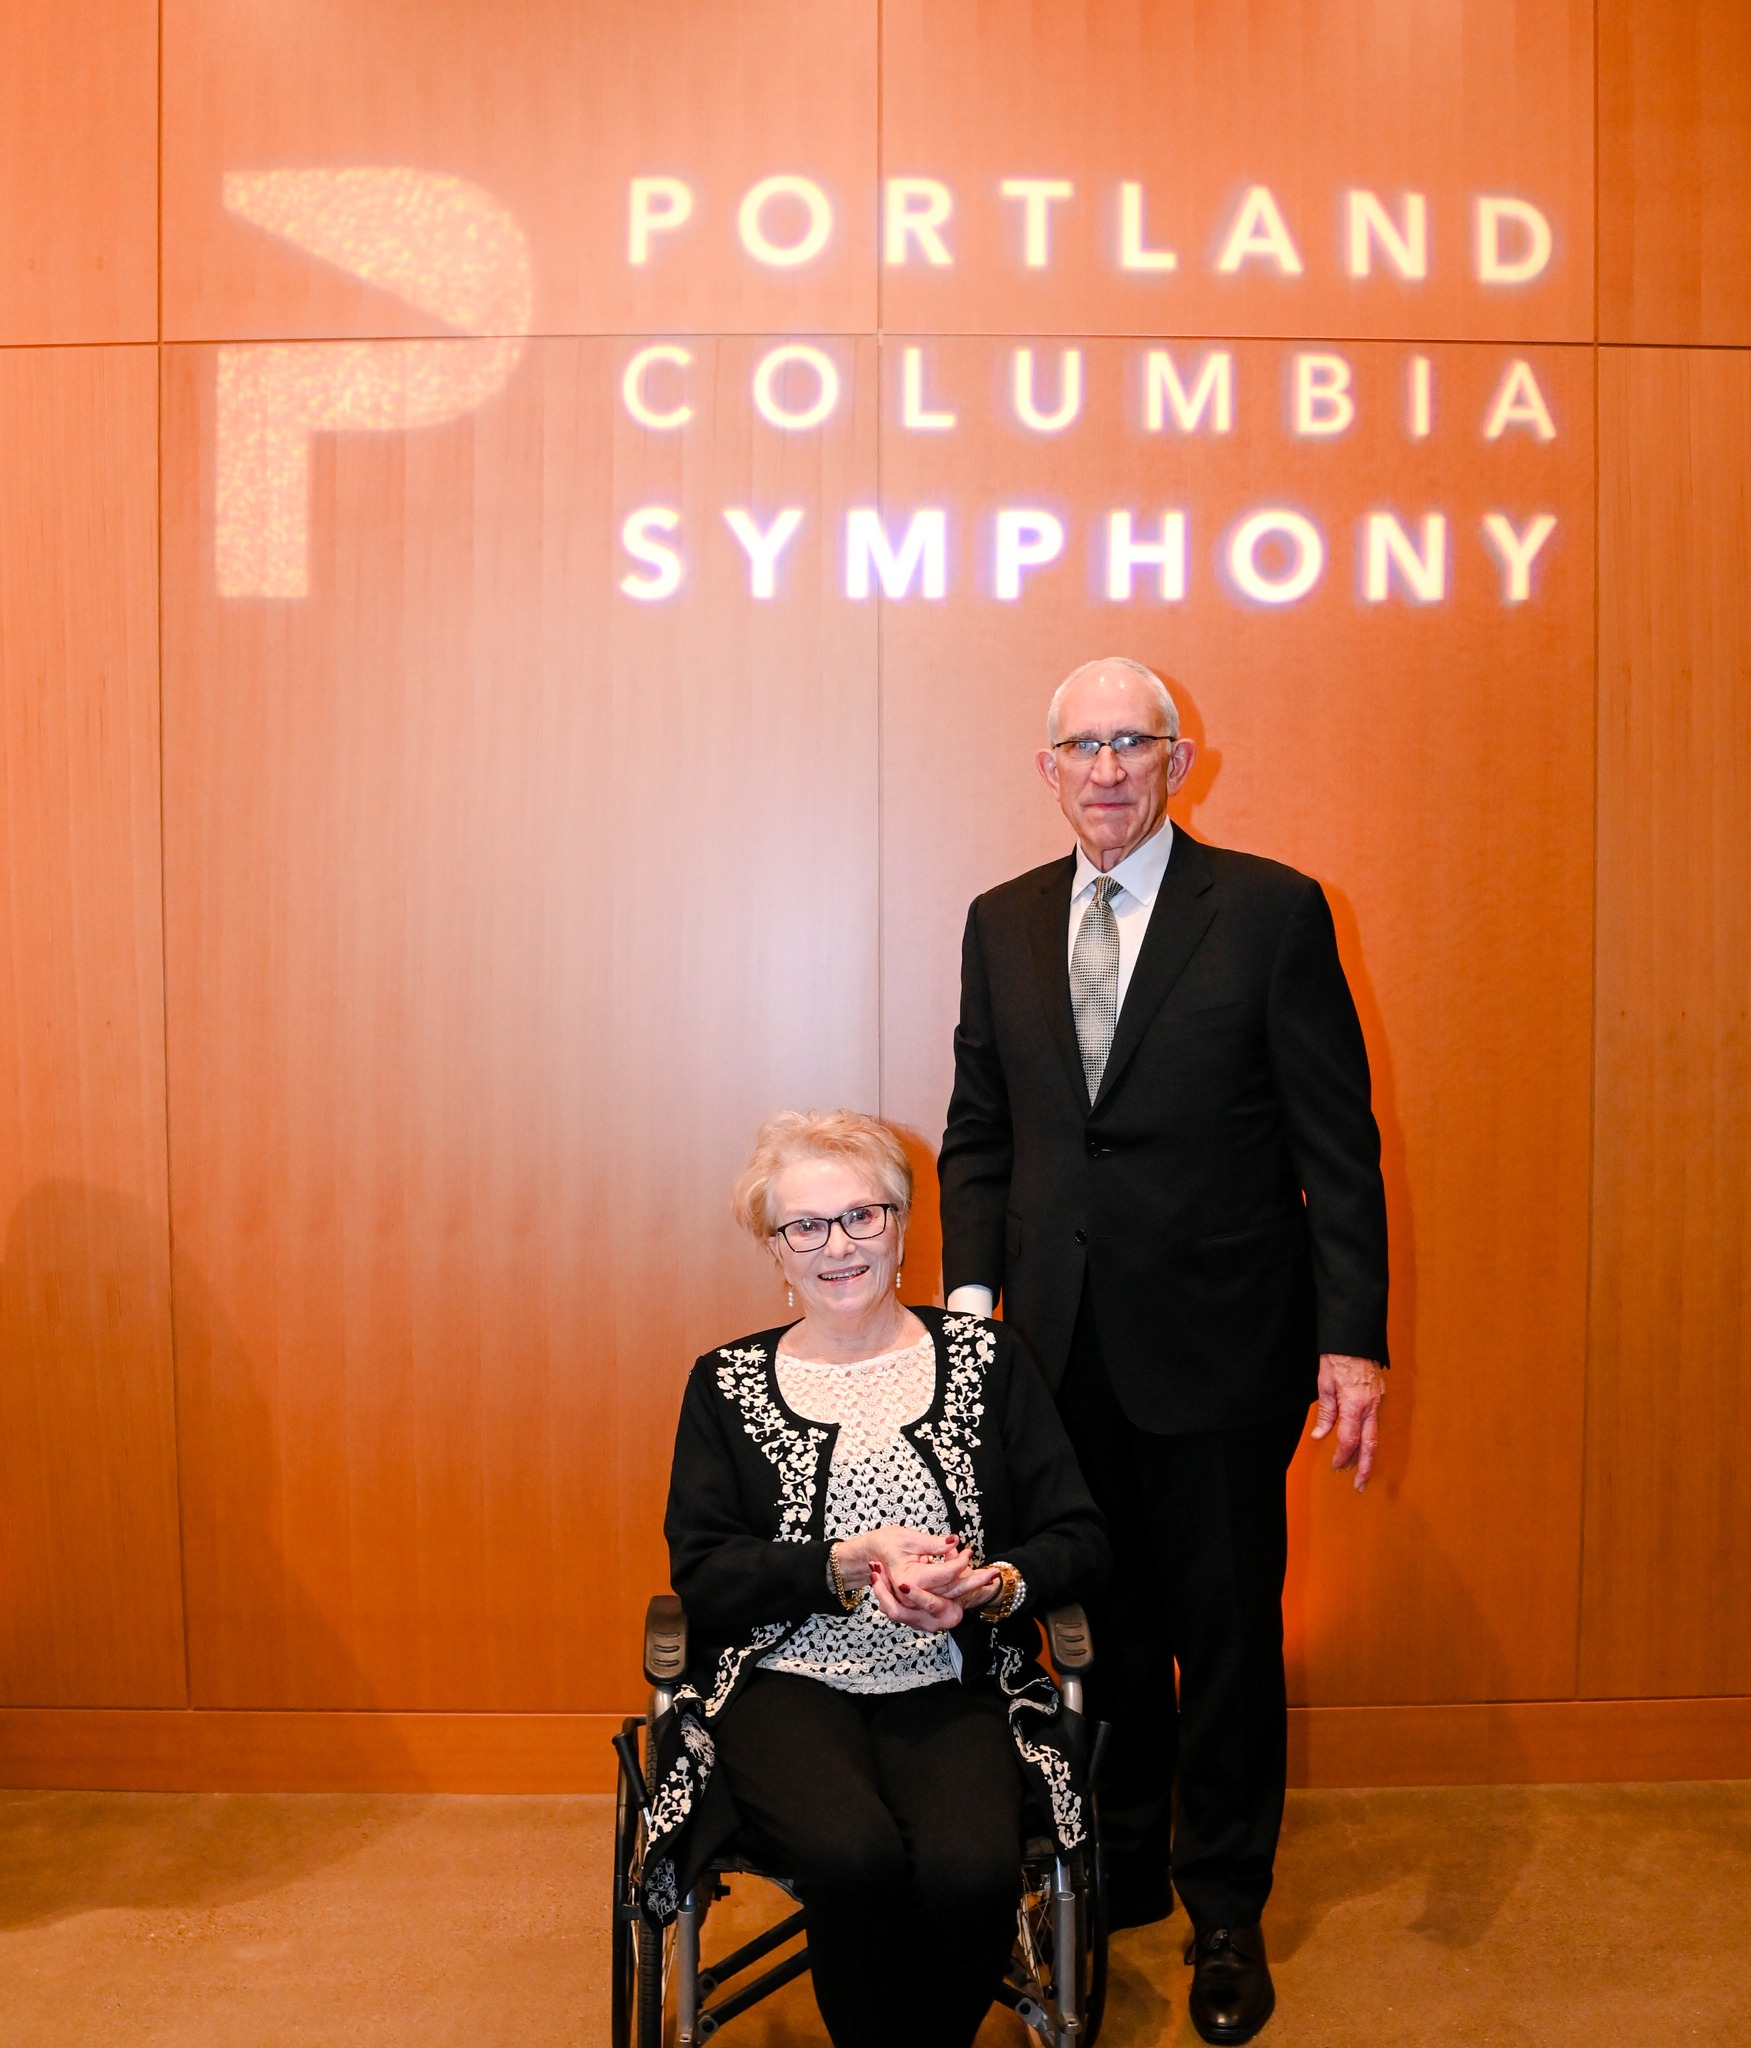 Greg and Betsy Hatton smiling in front of the Portland Columbia Symphony.